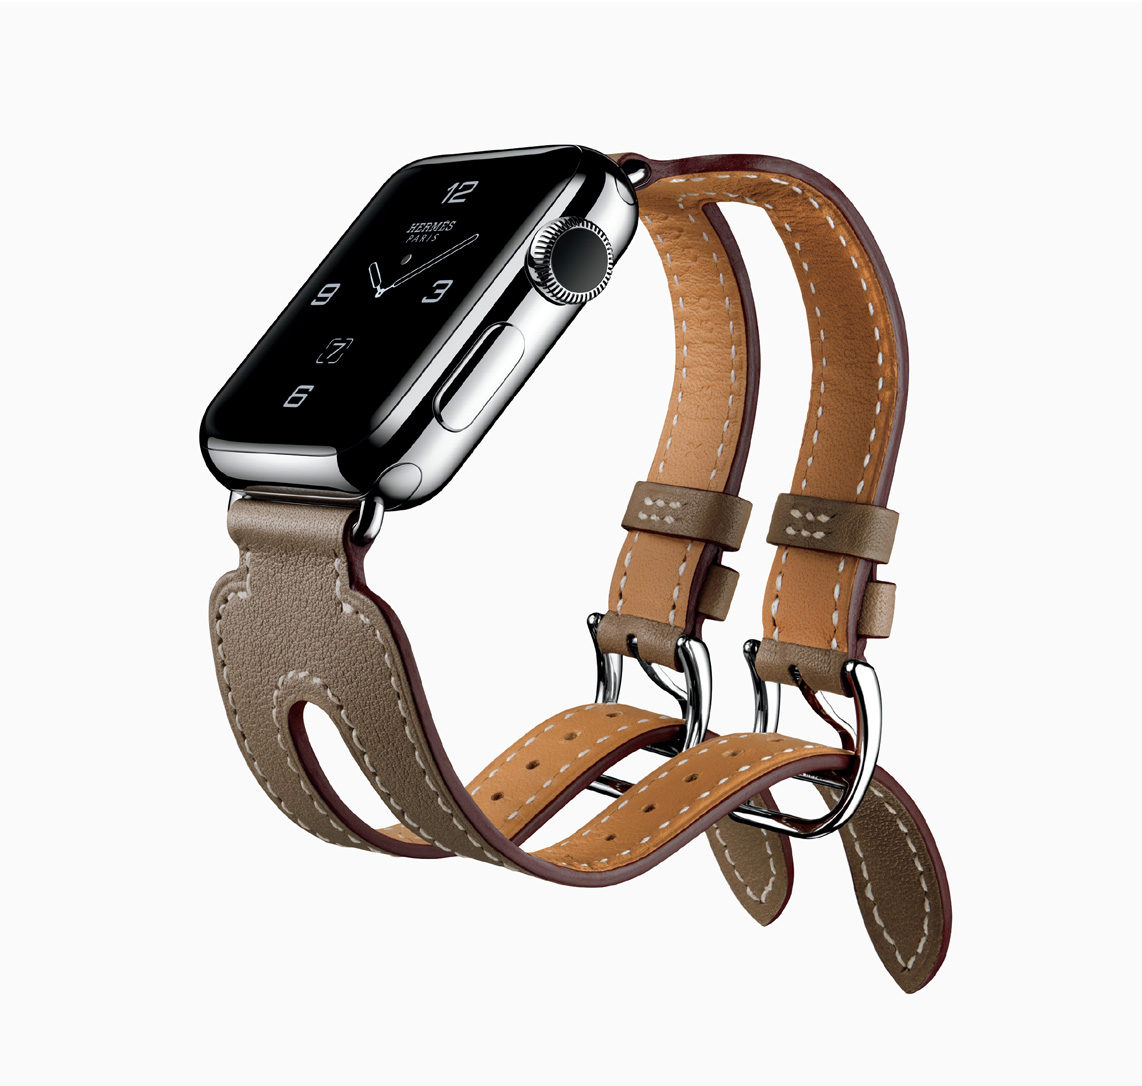 Apple Watch Hermes introduces new styles & colors_1